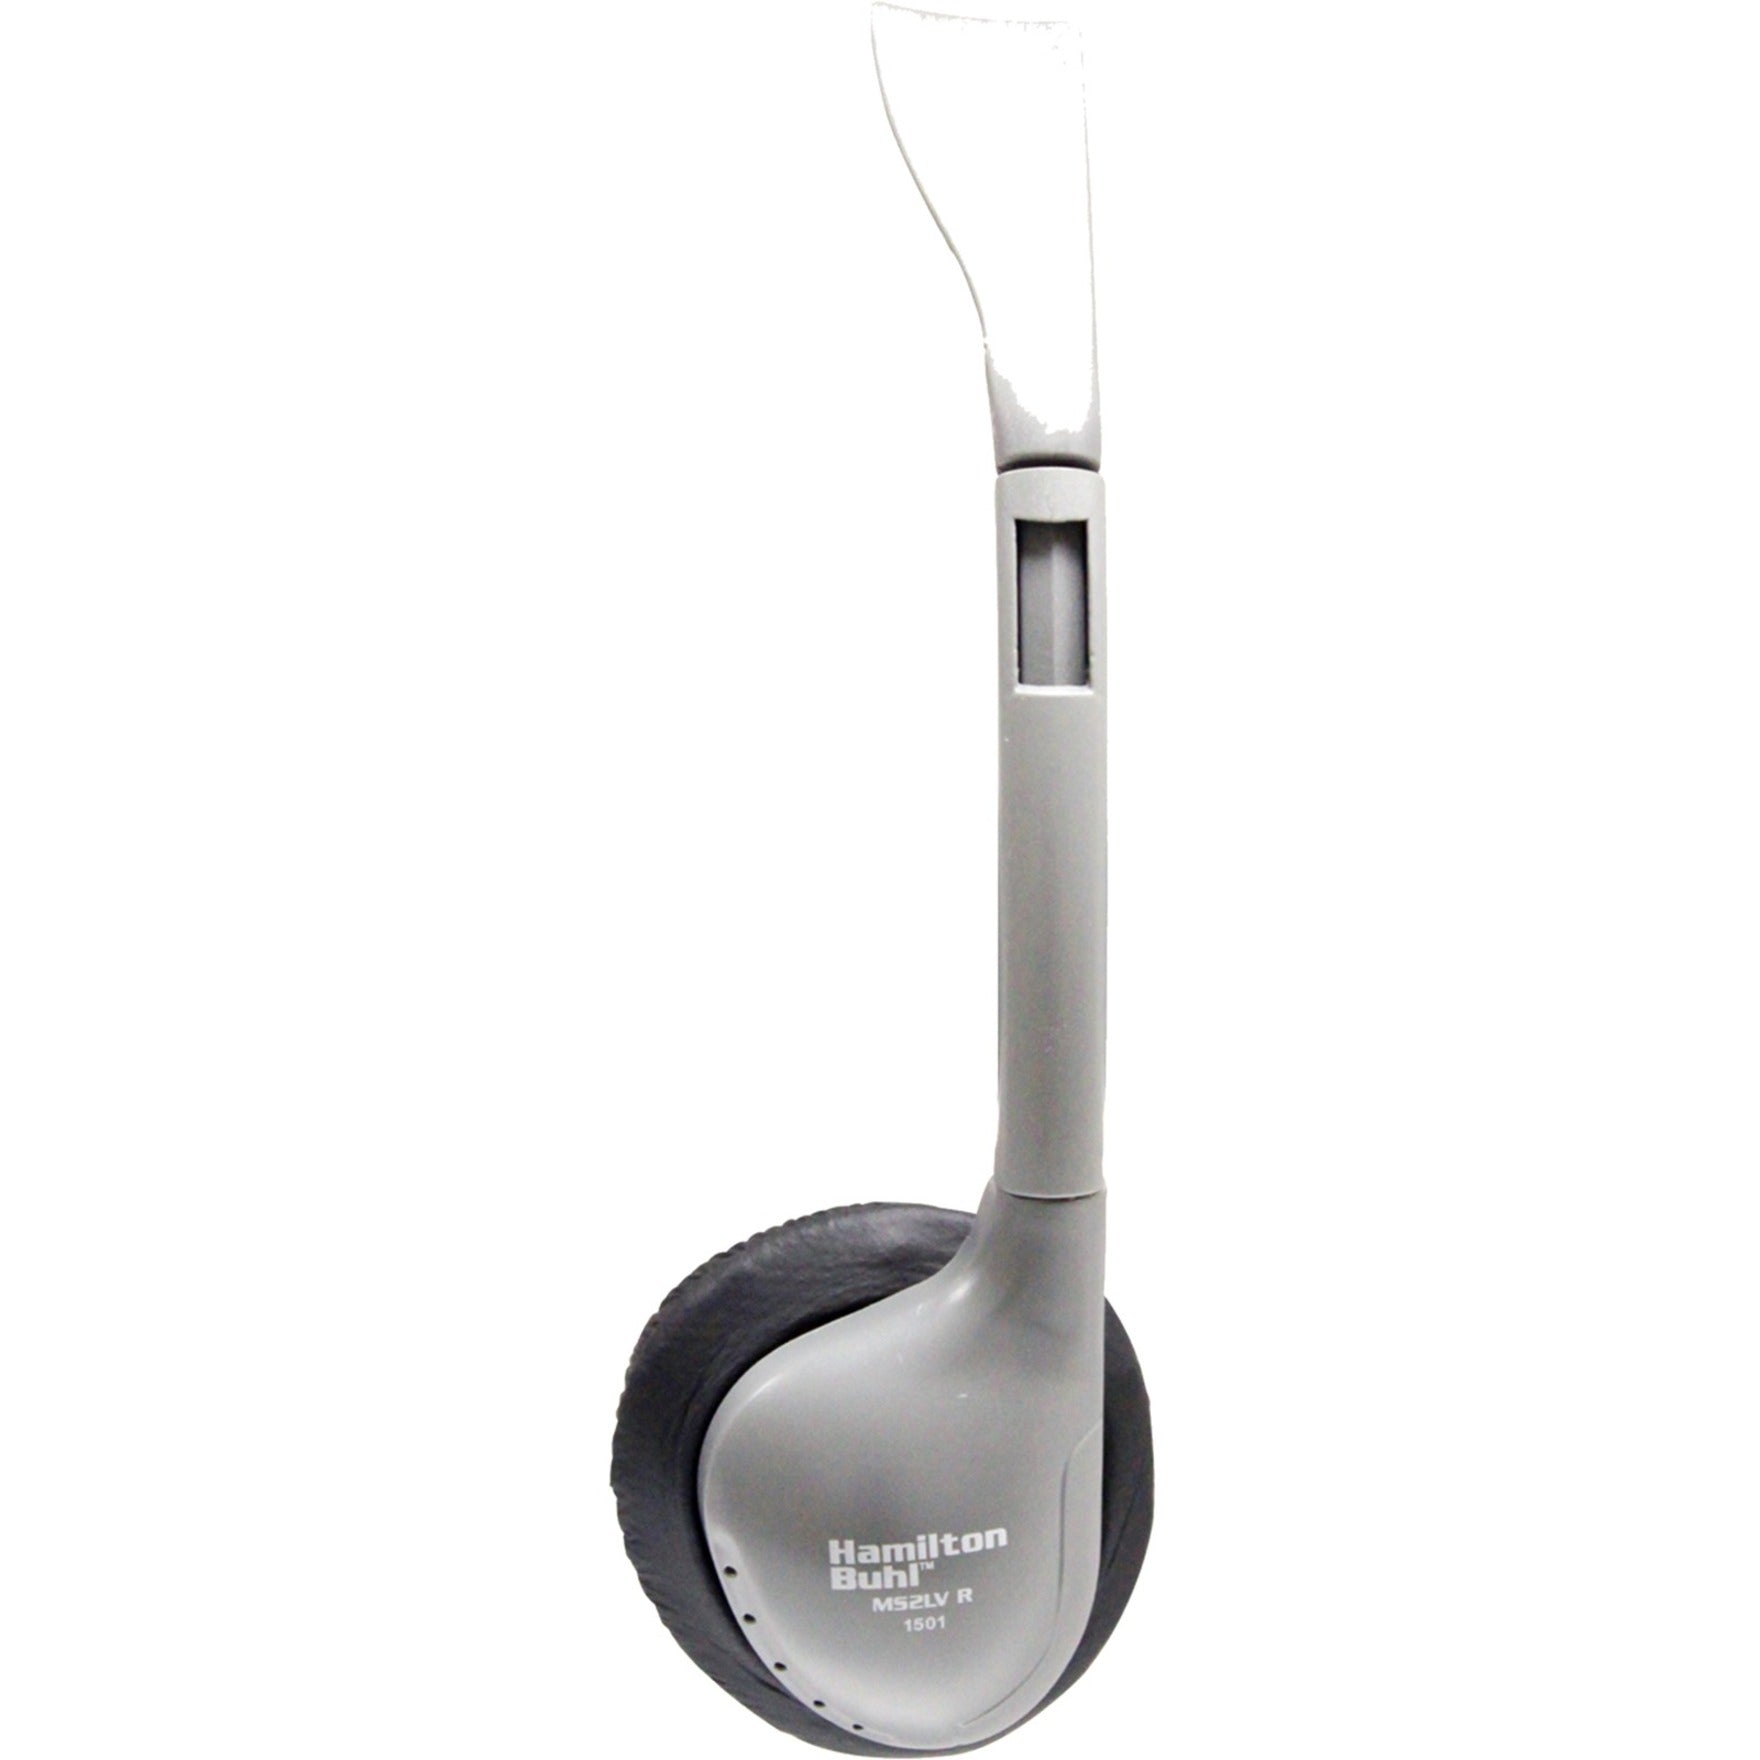 Hamilton Buhl MS2LV SchoolMate Personal Stereo Headphone with in-line Volume, Leatherette - Rugged, Tangle-free Cable, Durable, Lightweight